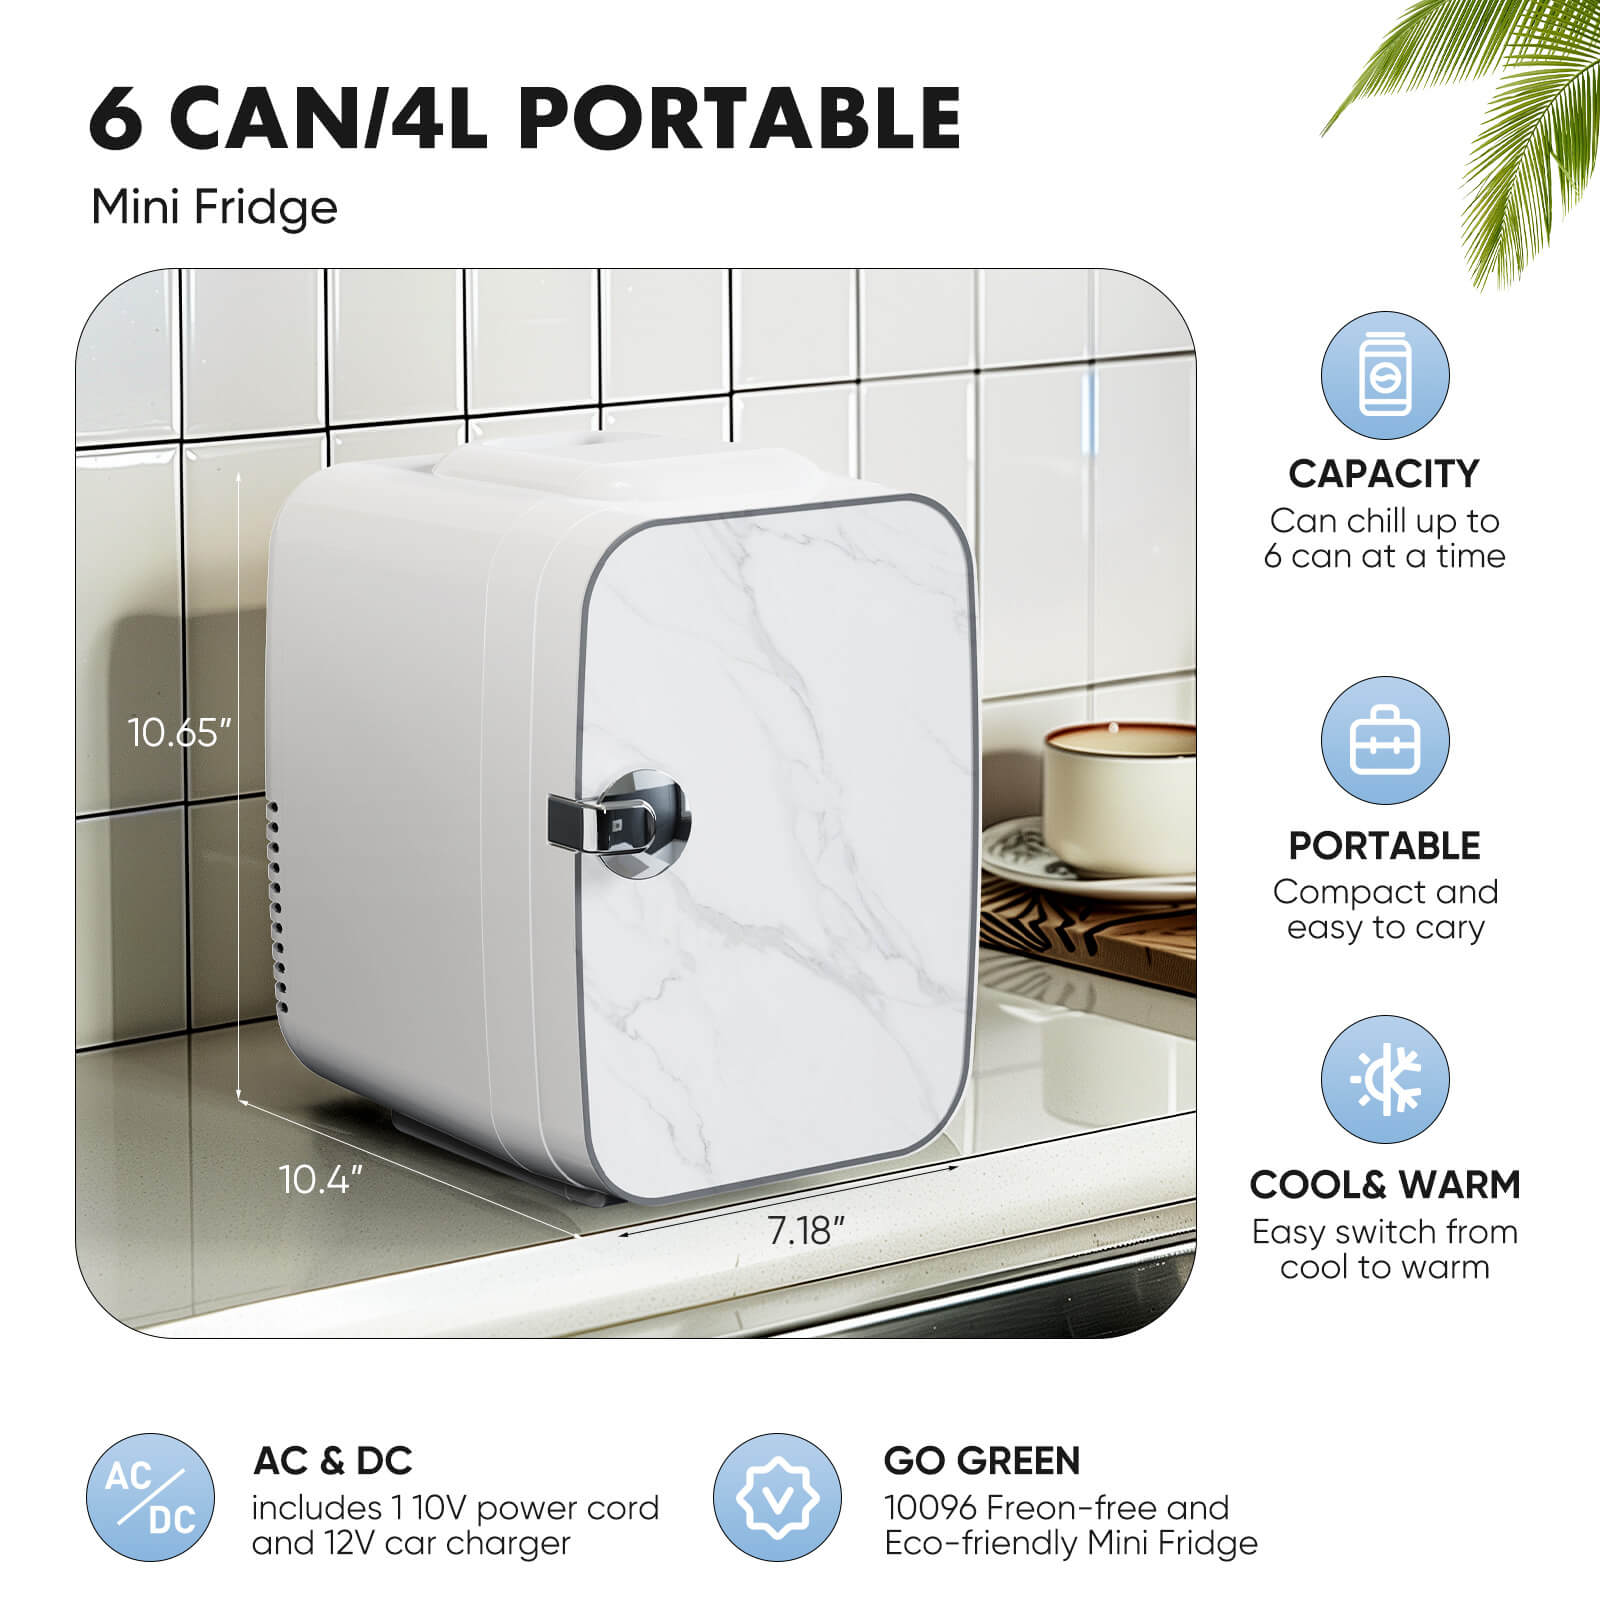 Portable 4 litre mini fridge - hot and cold, can store skin care products, food, etc., suitable for home, office, car refrigerator